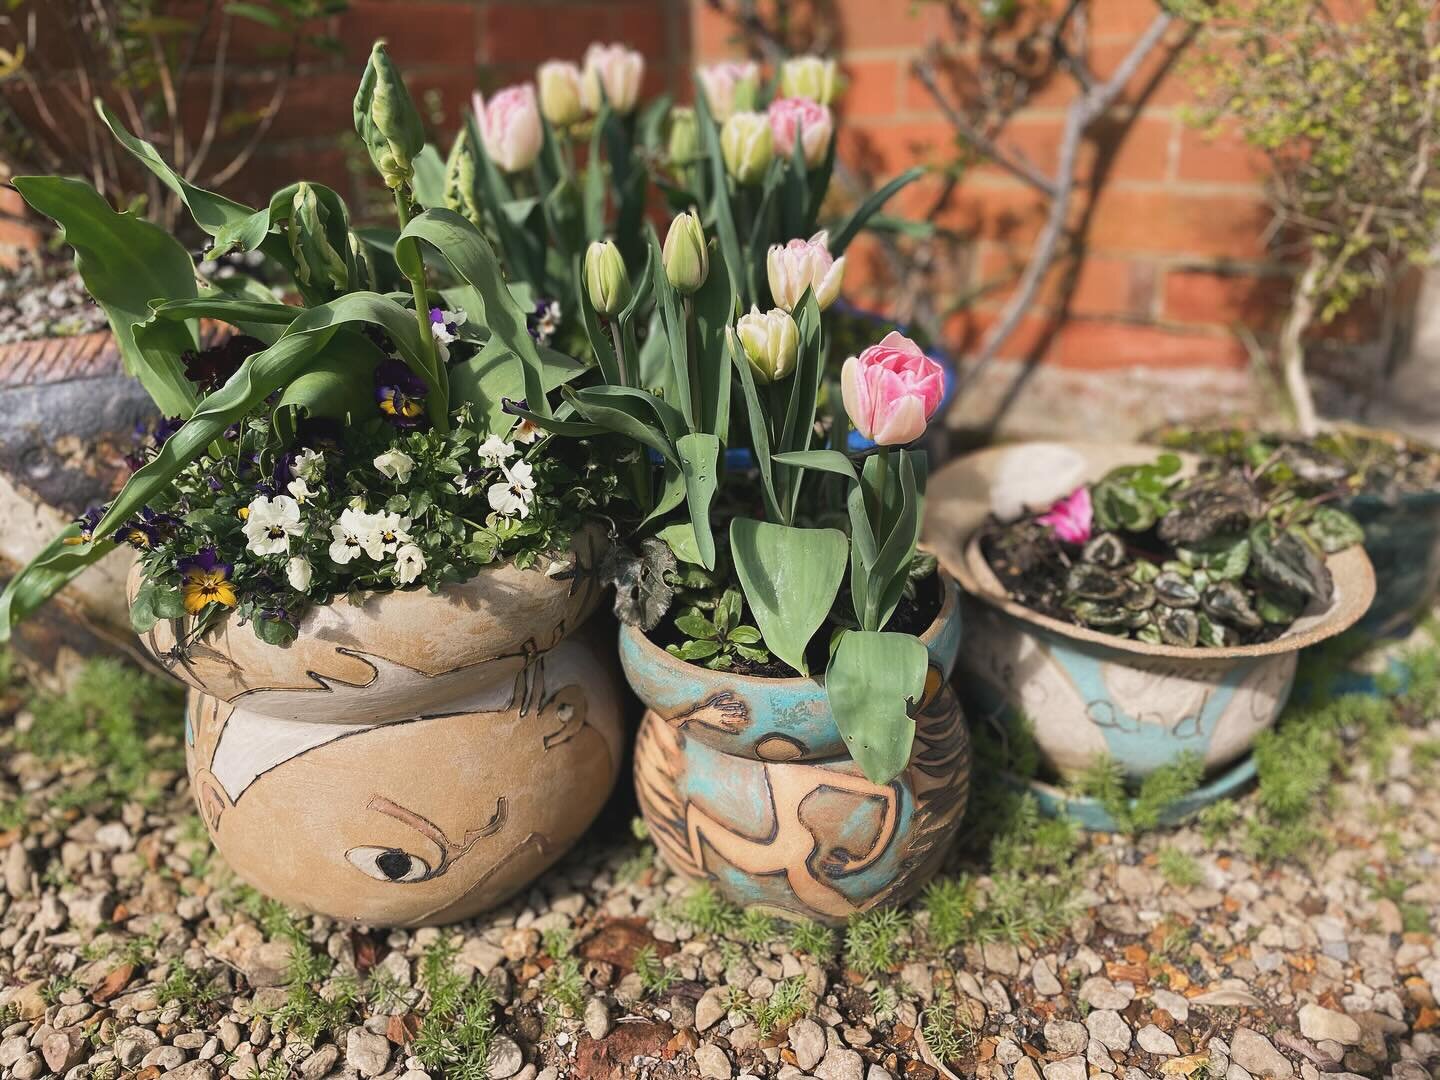 Frost Proof! My planters have drainage holes and water trays if you want them. They have been fired to stoneware and are therefore frost proof. @celebratingceramics @salisburyartsscene @fisherton.mill @messumswest  #gardendesign #gardenplanters @sali